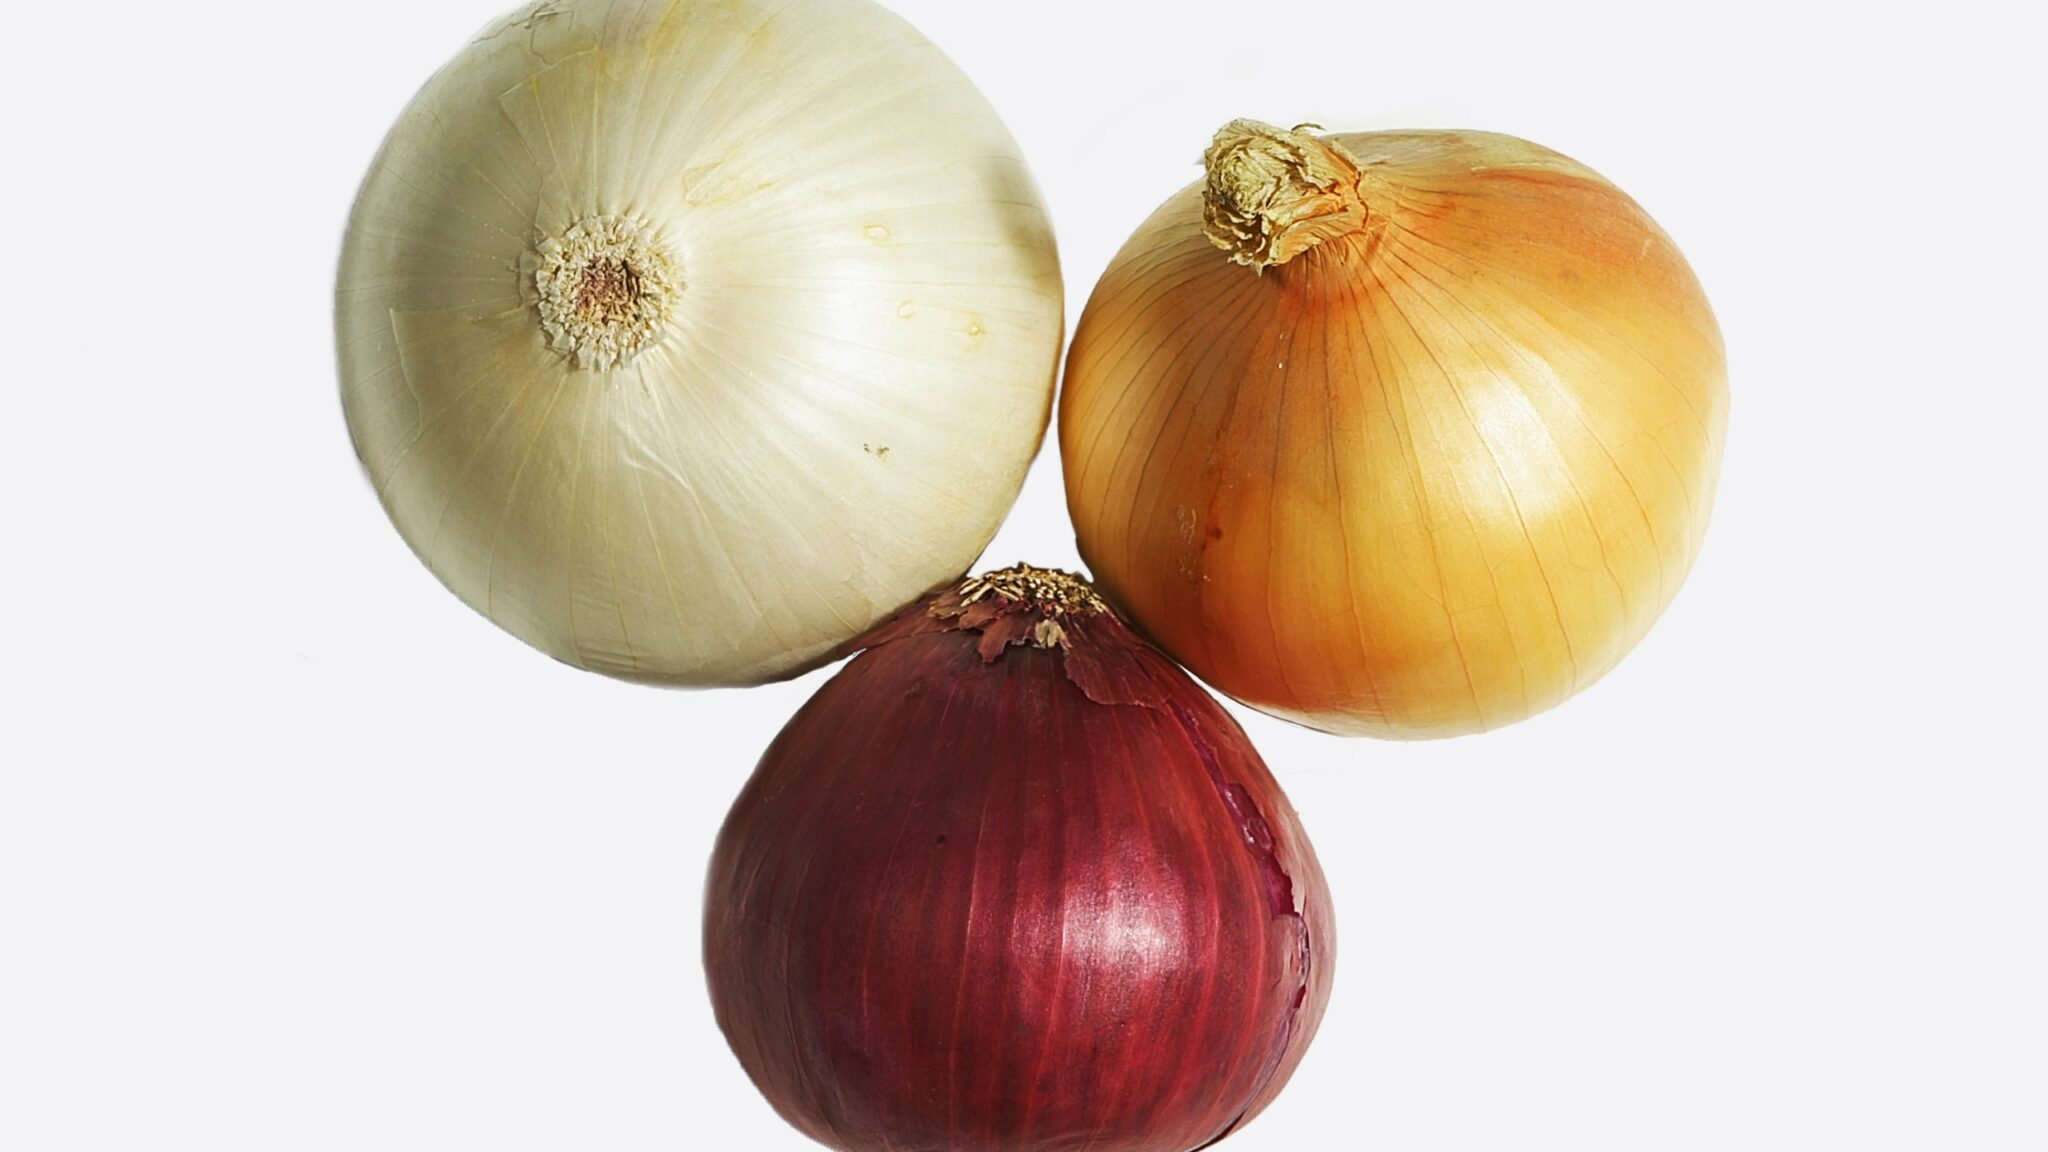 why are vidalia onions so much sweeter than other types of onions